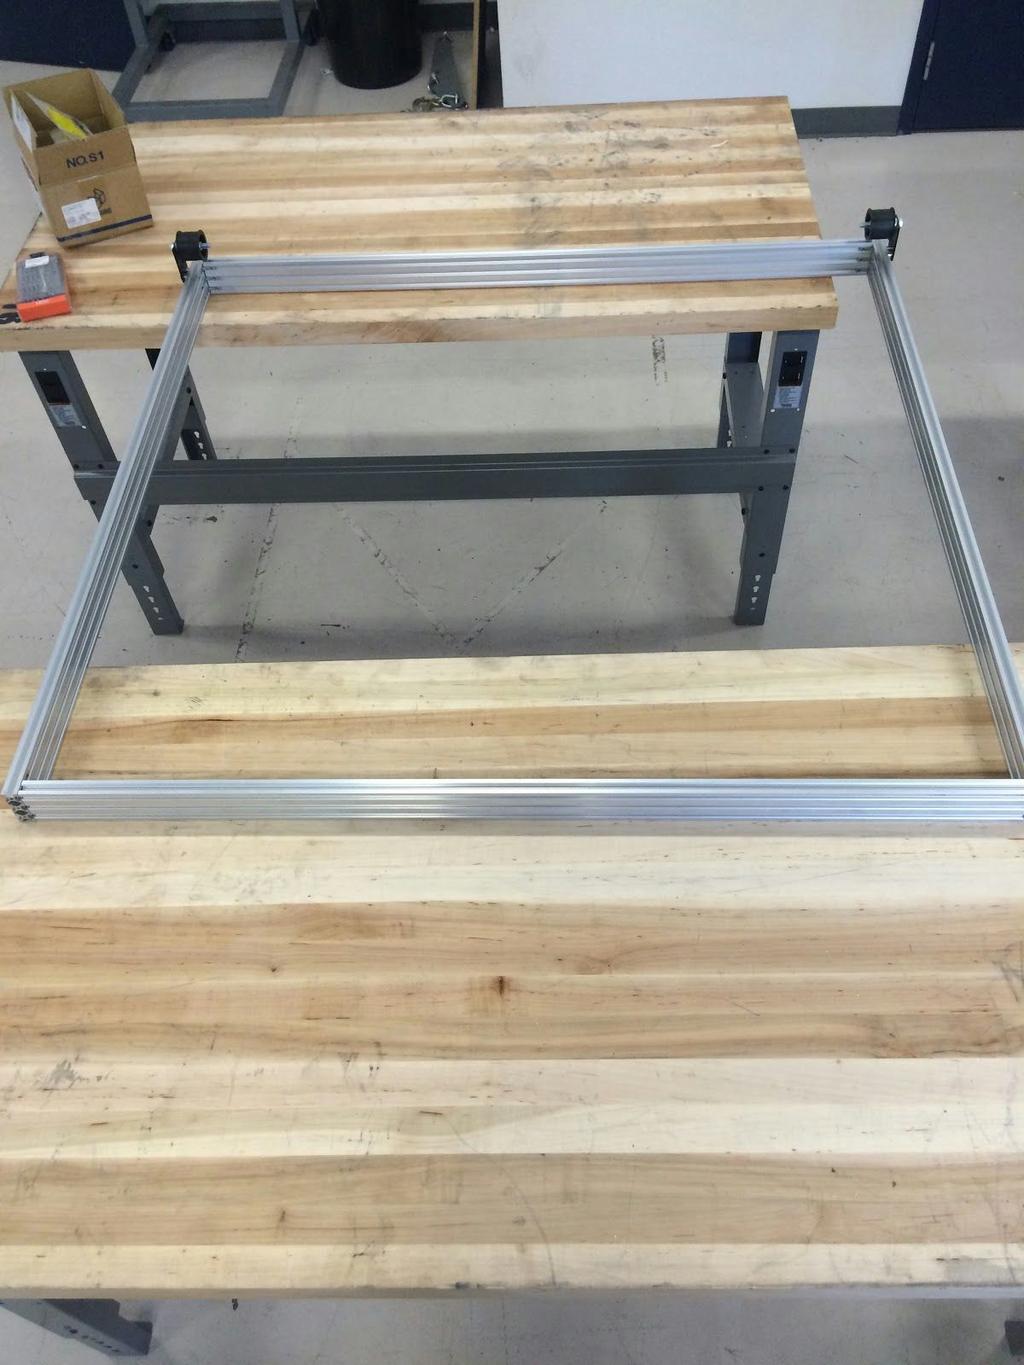 ( Figure 10) shows four V Slot extruded aluminum linear rails connected together to create the main structure for